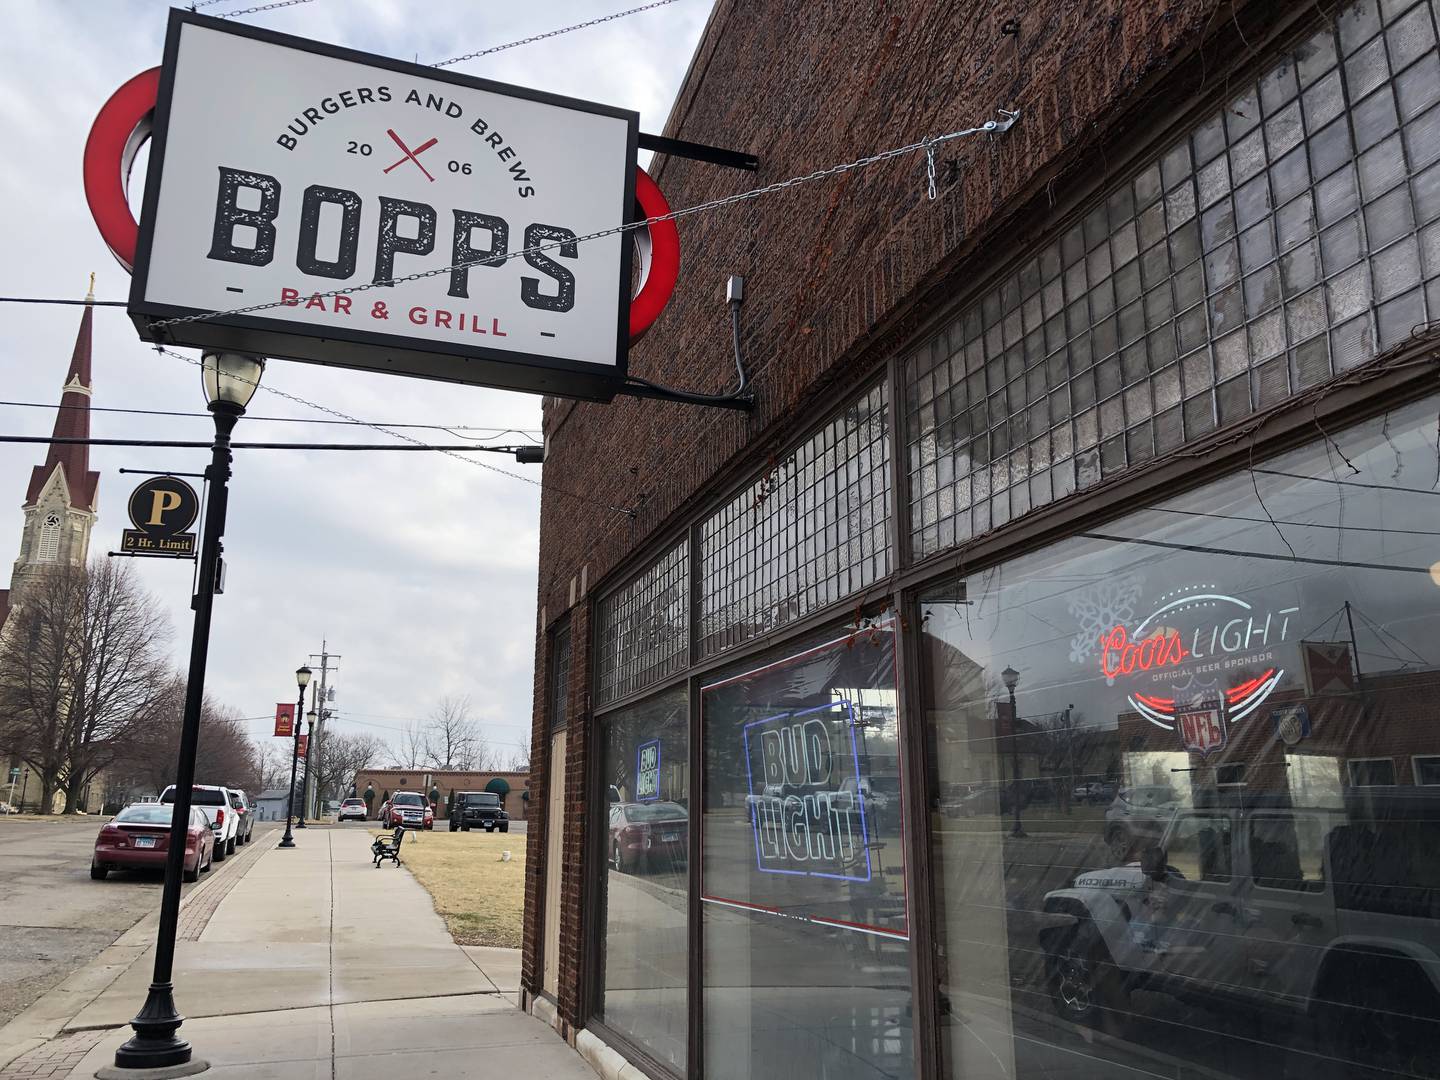 Samantha Roesner plans for a new logo but won't change the name of Bopps Bar and Grill in Harvard, which she bought last summer and seen here on Wednesday, Jan. 11, 2023.